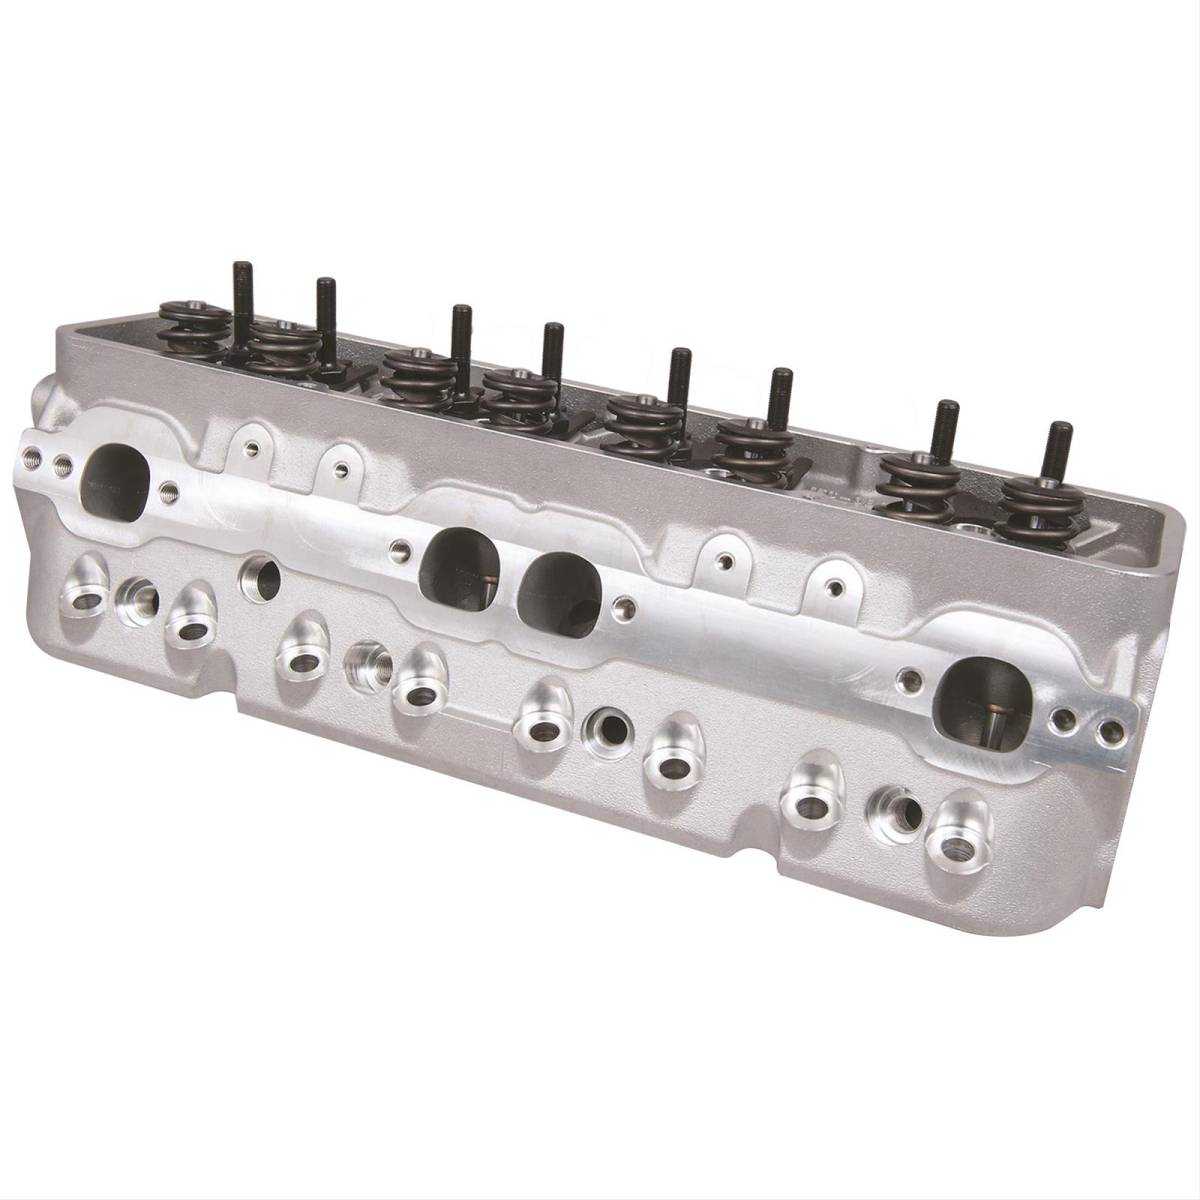 Trickflow - Trickflow Super 23 Cylinder Heads, SB Chevy, 195cc Intake, 64cc Chambers, 1.250" Springs, Perimeter Bolt - Image 1